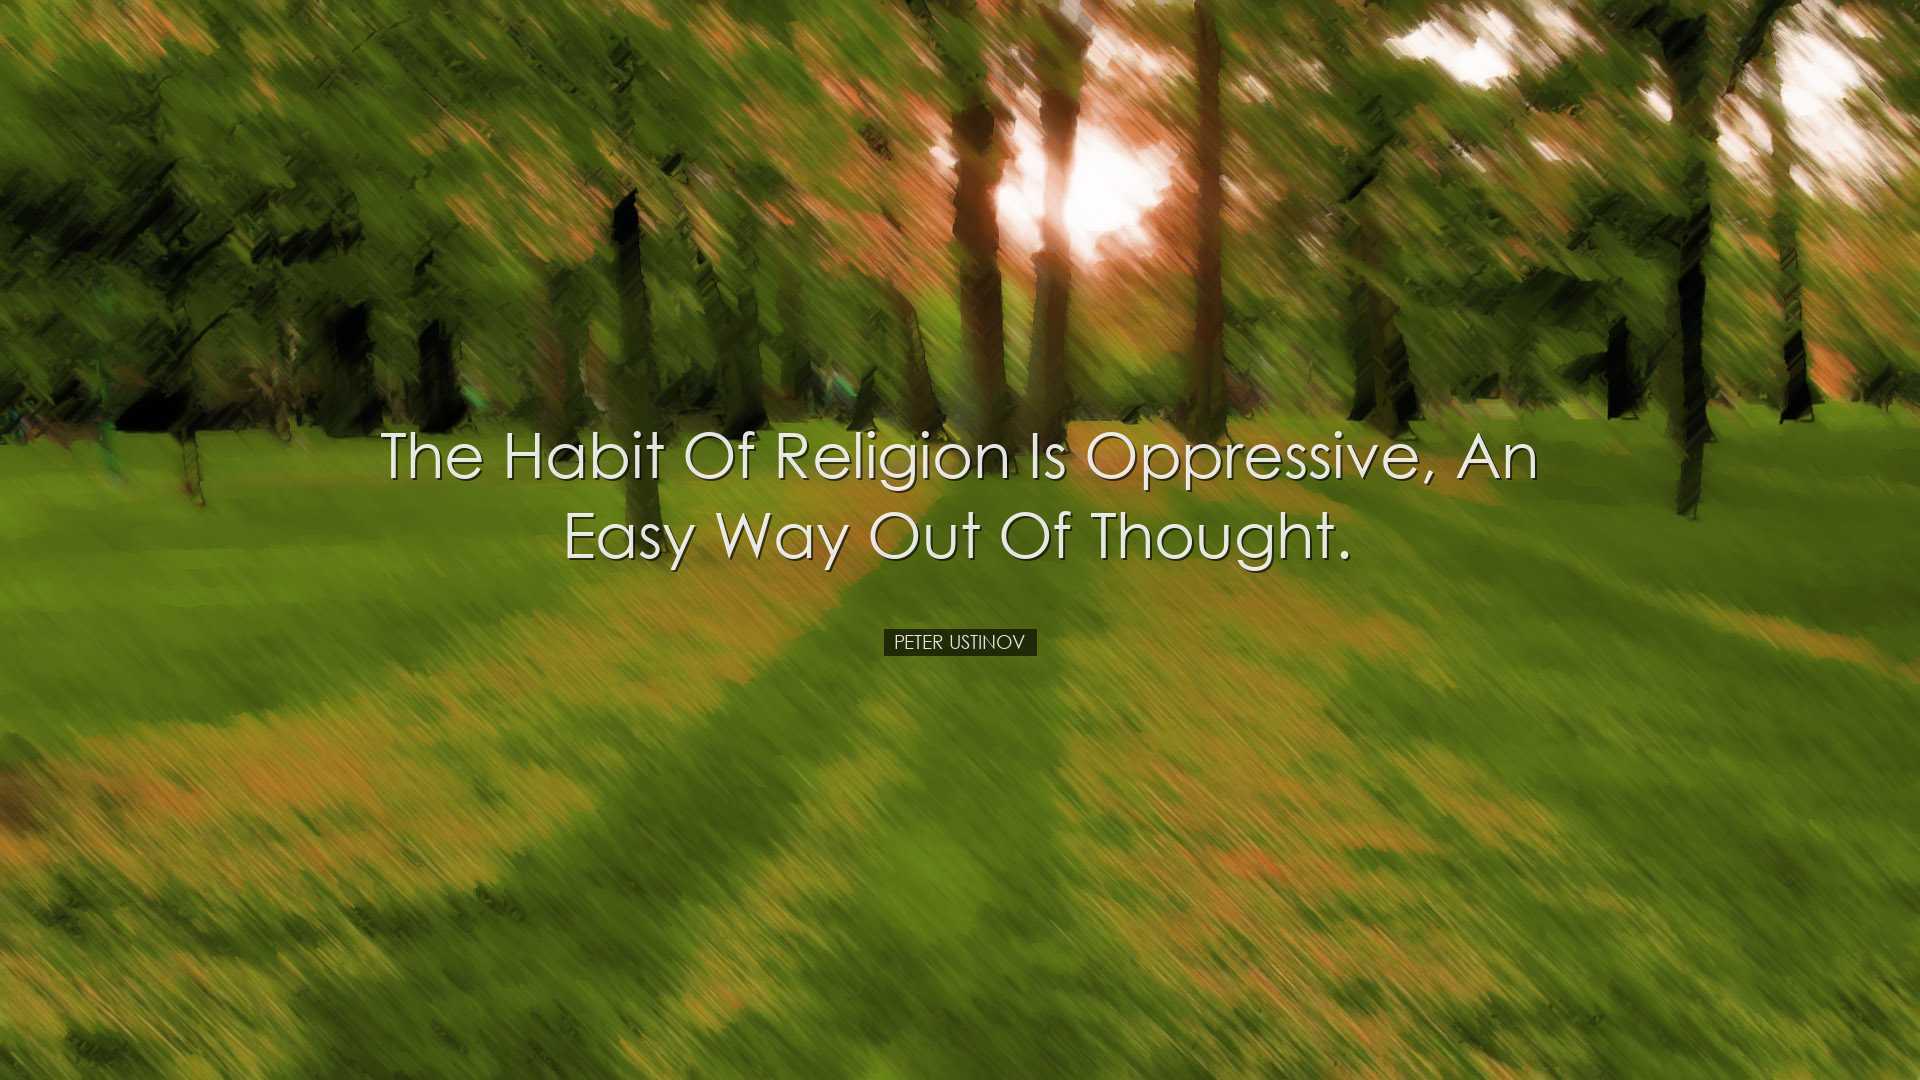 The habit of religion is oppressive, an easy way out of thought. -